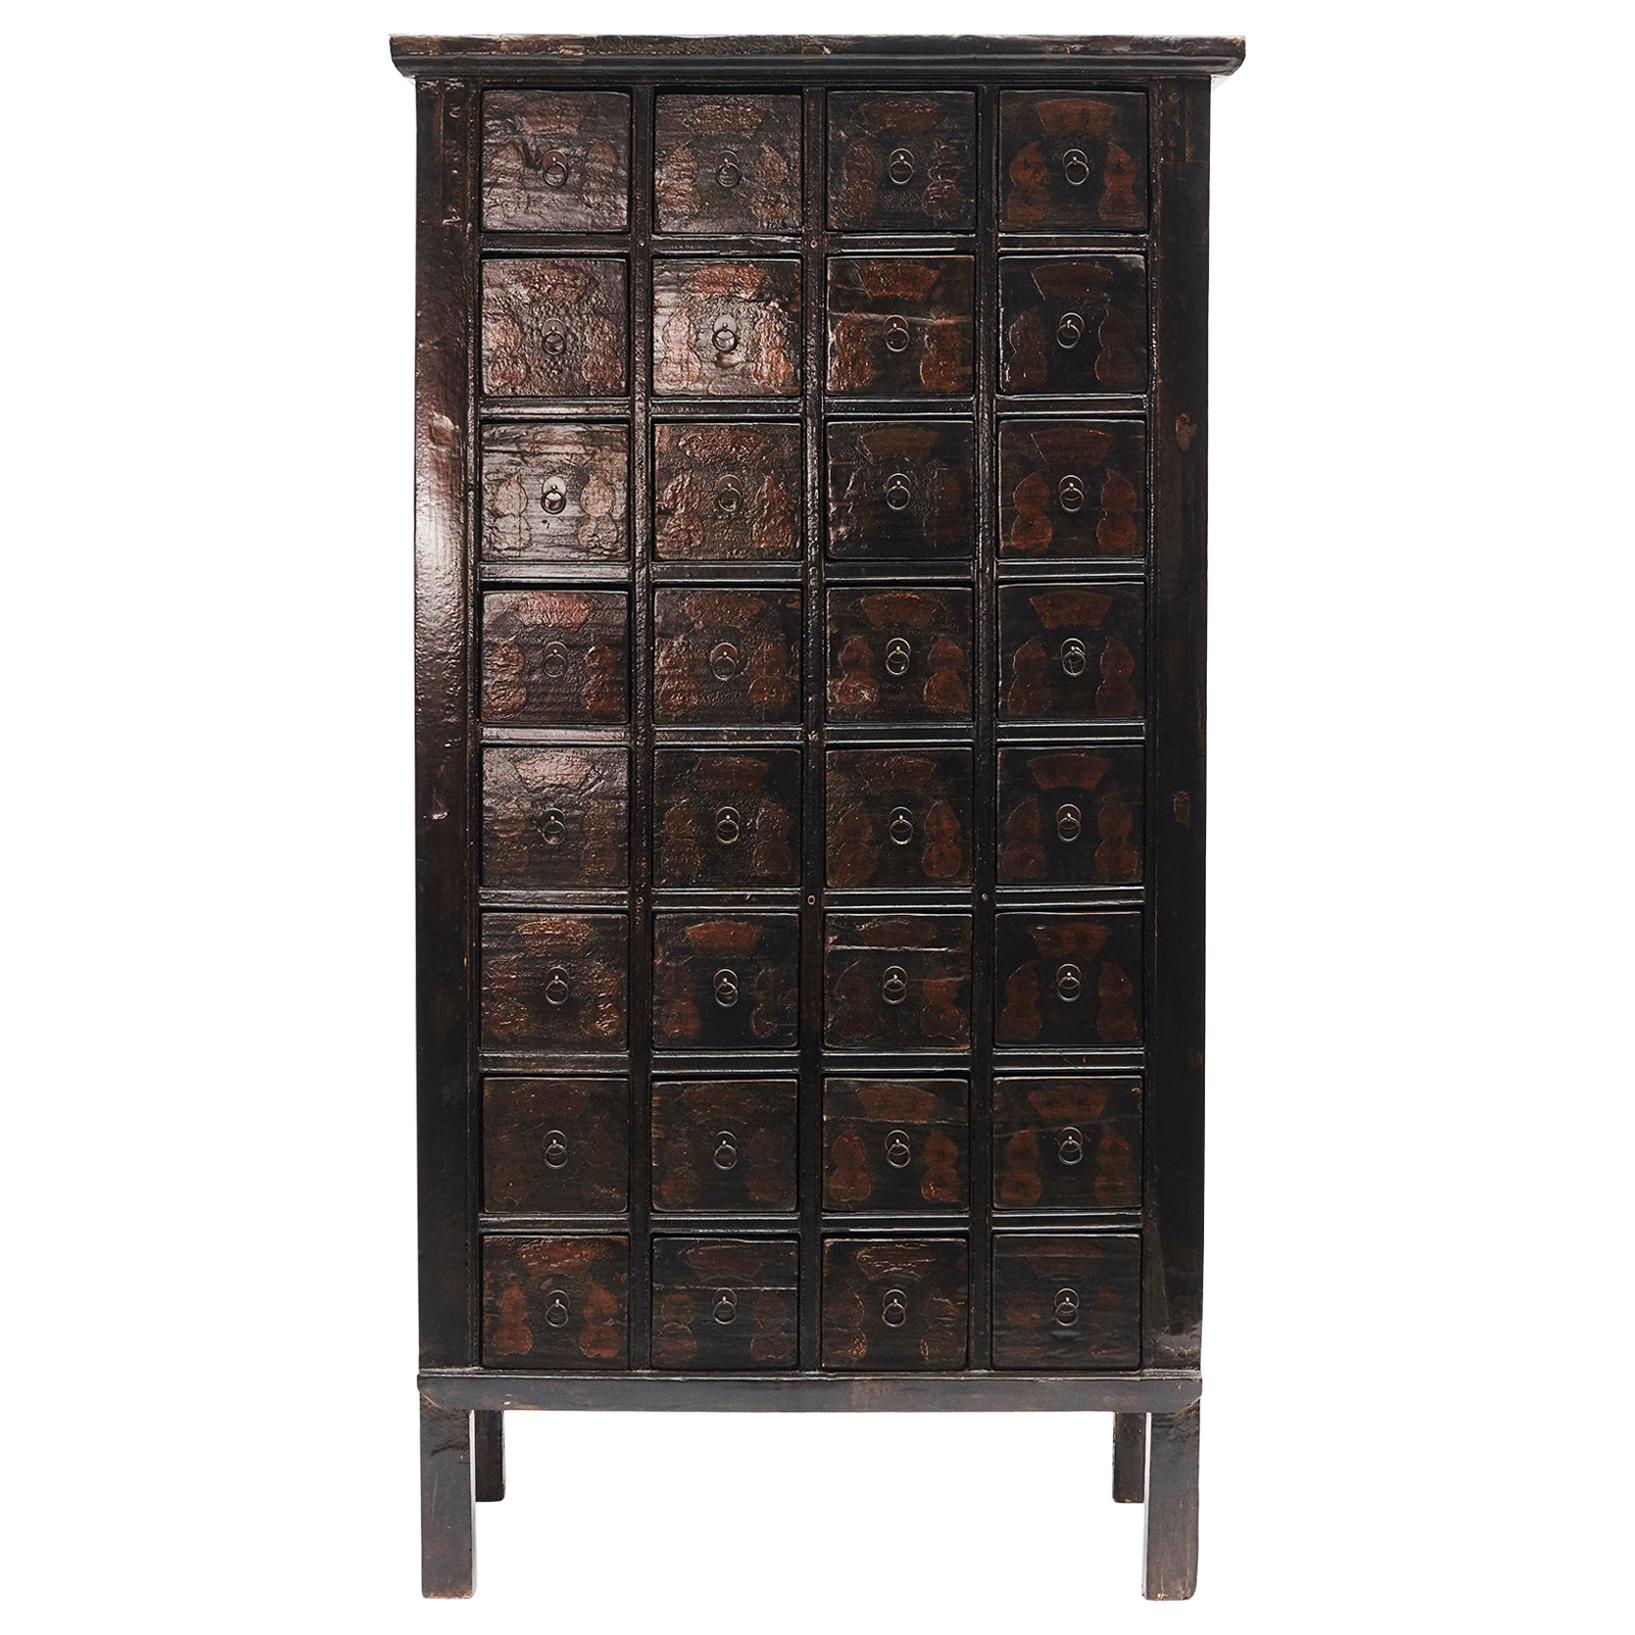 19th Century Chinese Apothecary Cabinet with 32 Drawers and Original Lacquer